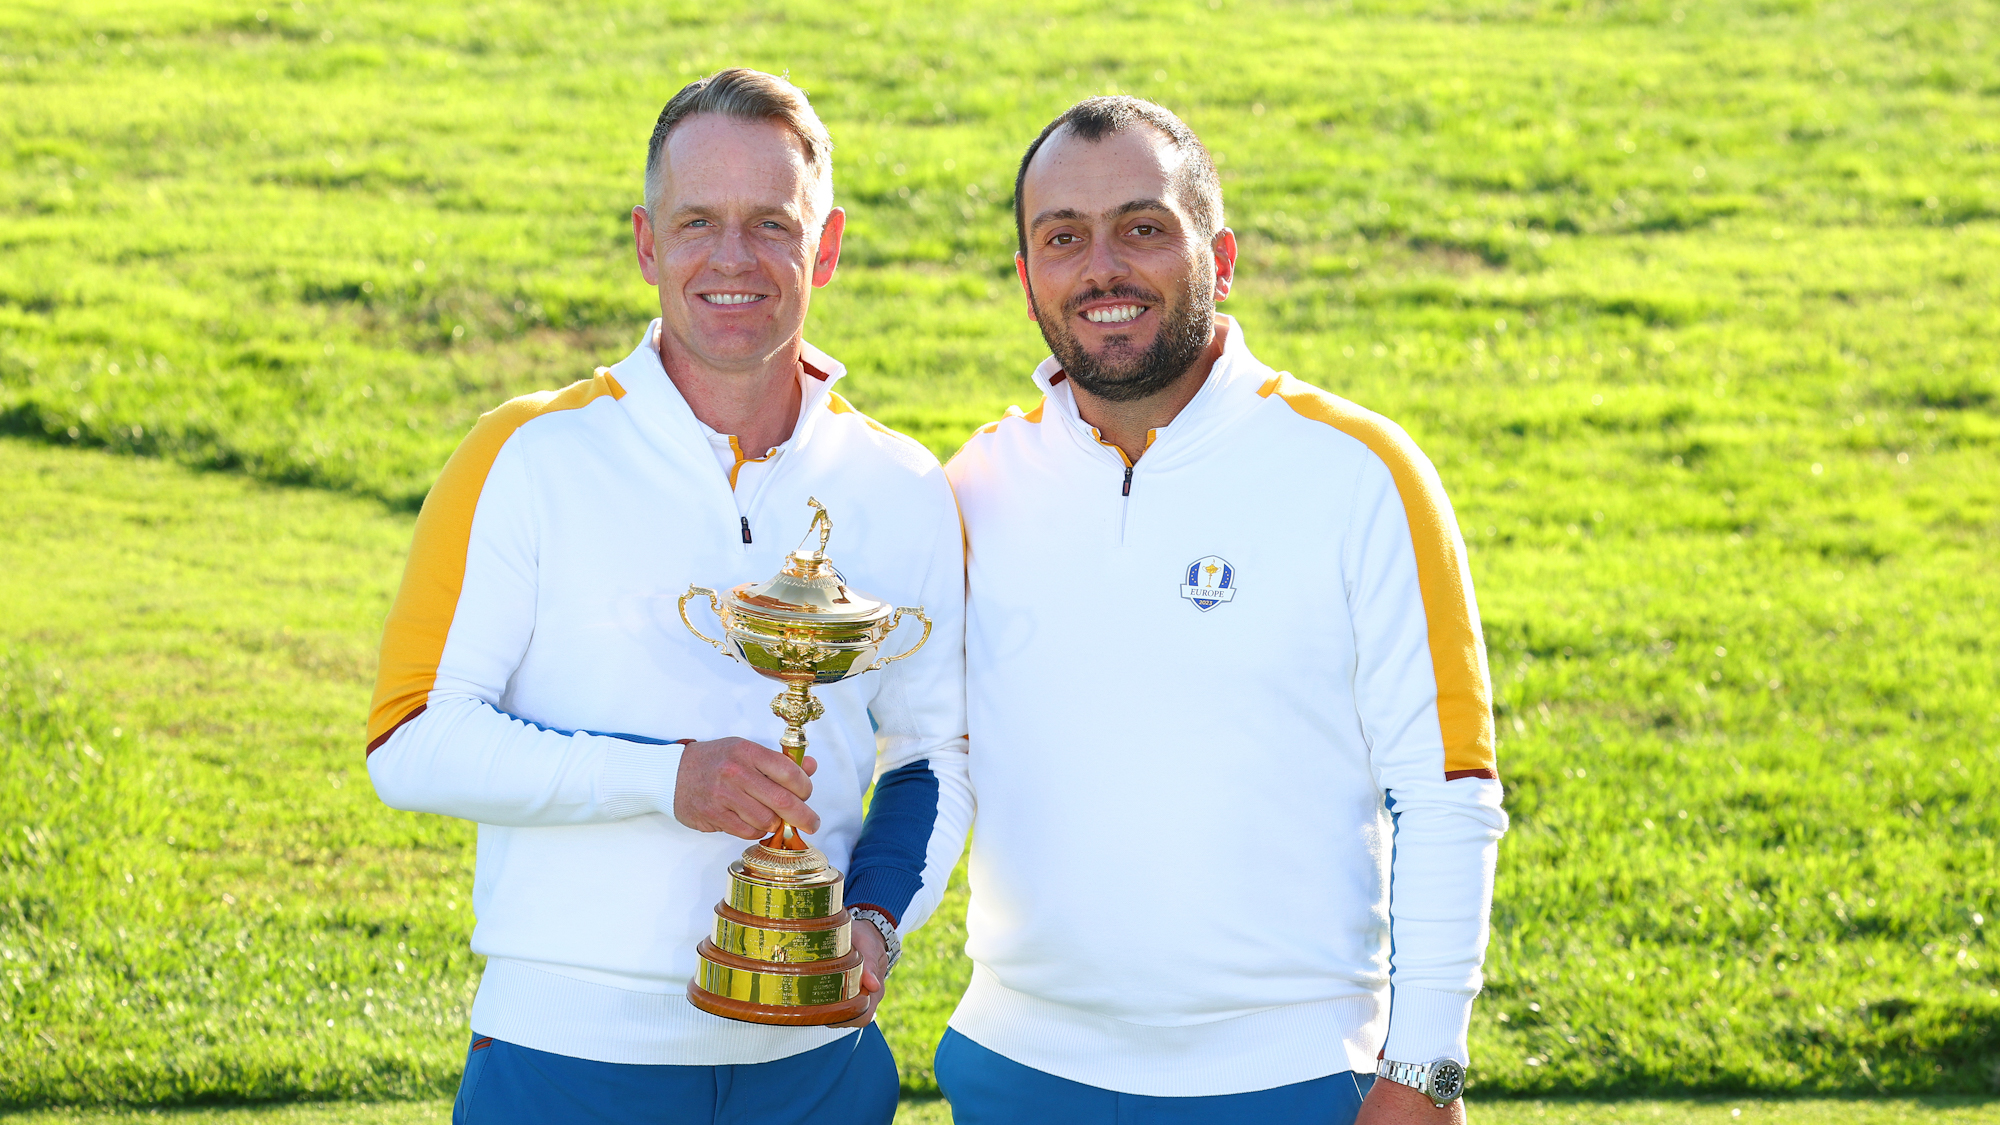 Luke Donald, Captain of Team Europe and Francesco Molinari, Vice Captain of Team Europe pose with the Ryder Cup trophy during the European Team Portraits at the 2023 Ryder Cup.